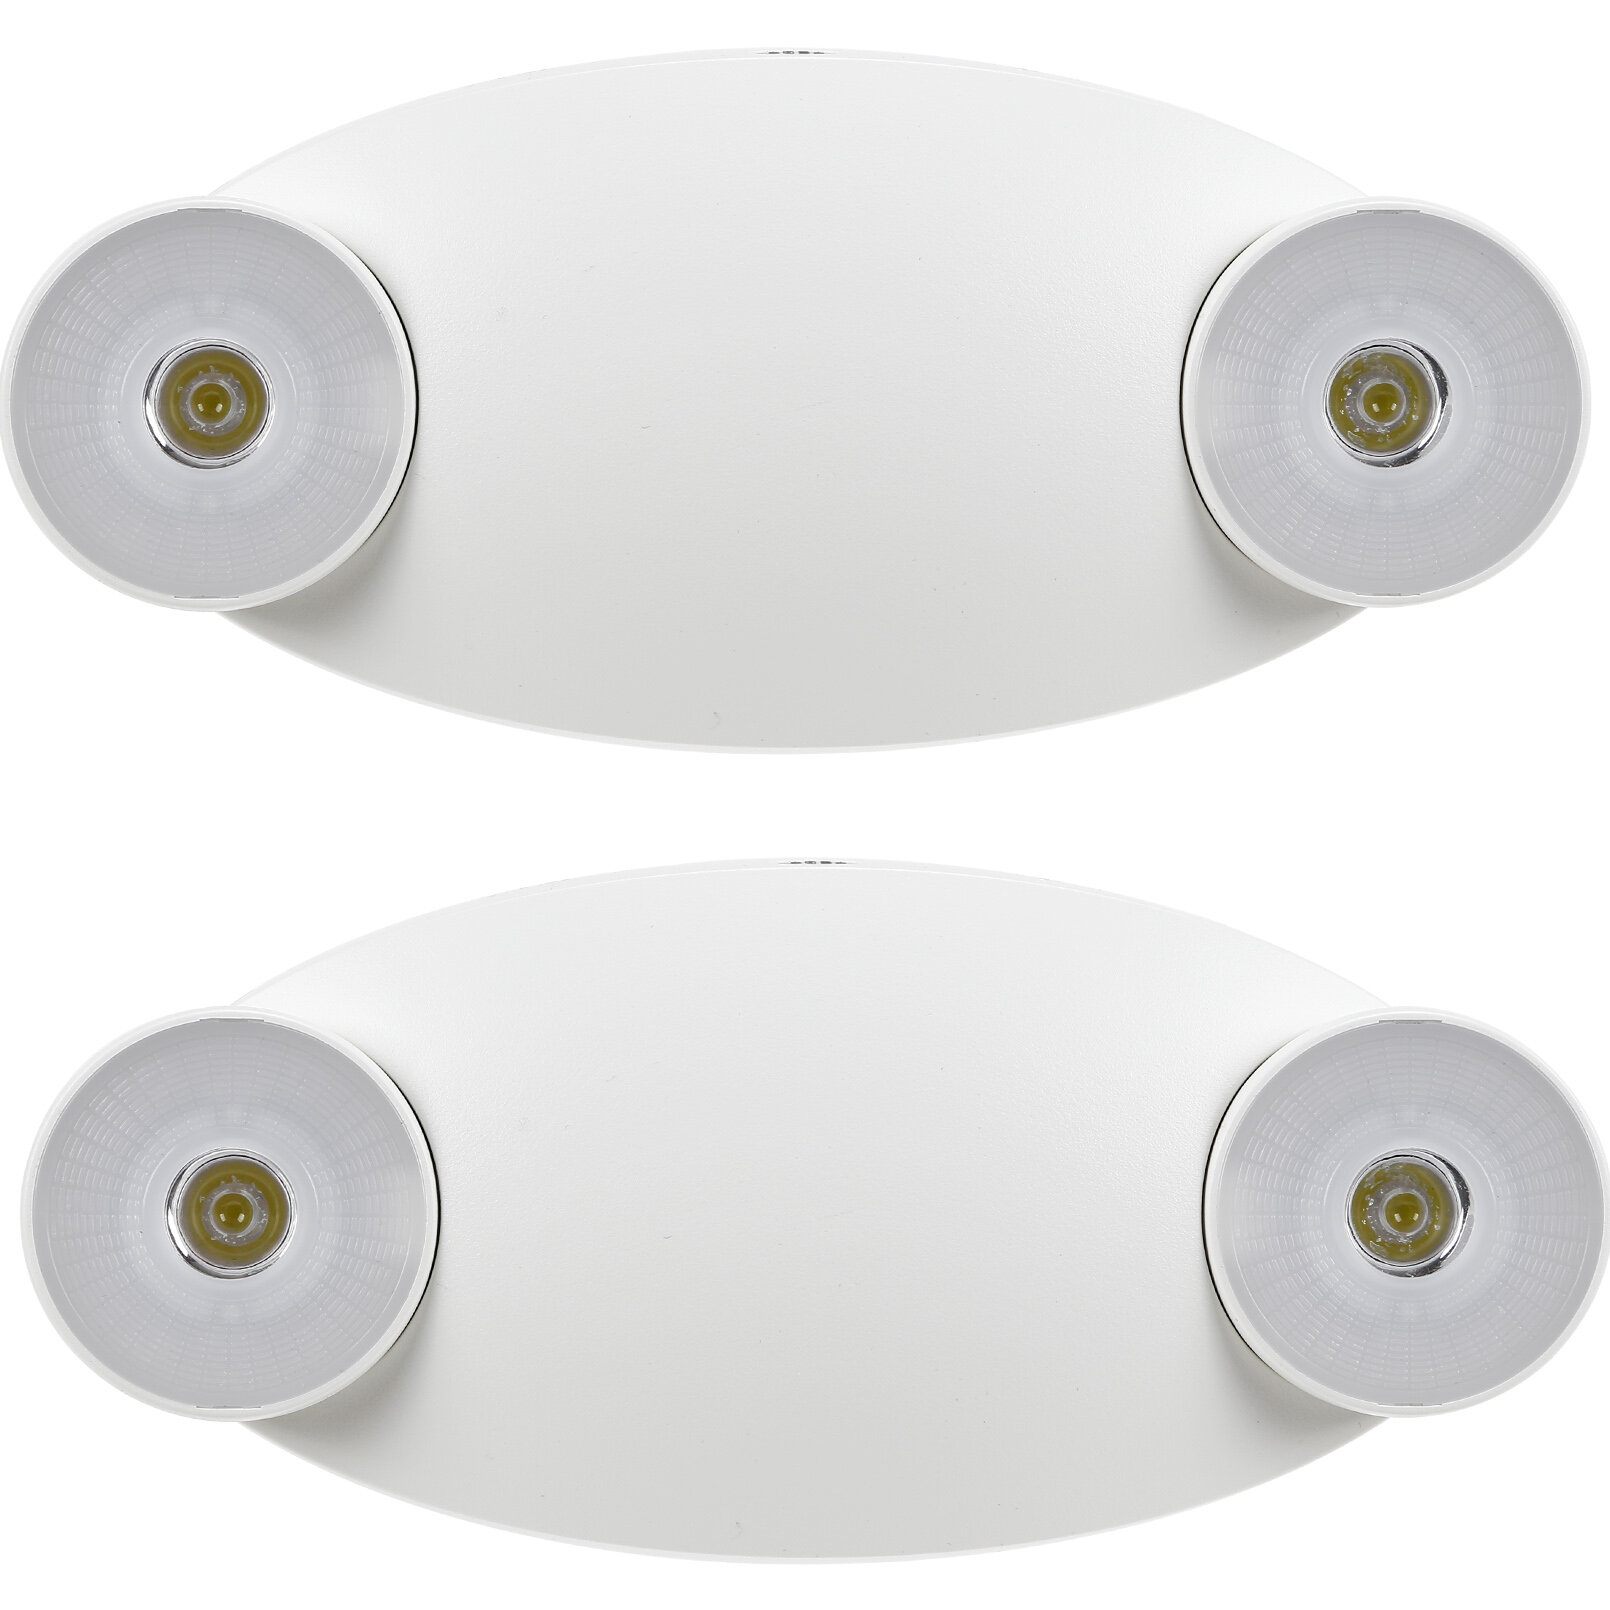 QUANTITY 2 Emergency Exit Light NEW UL Listed For Wet / Outdoor Locations 